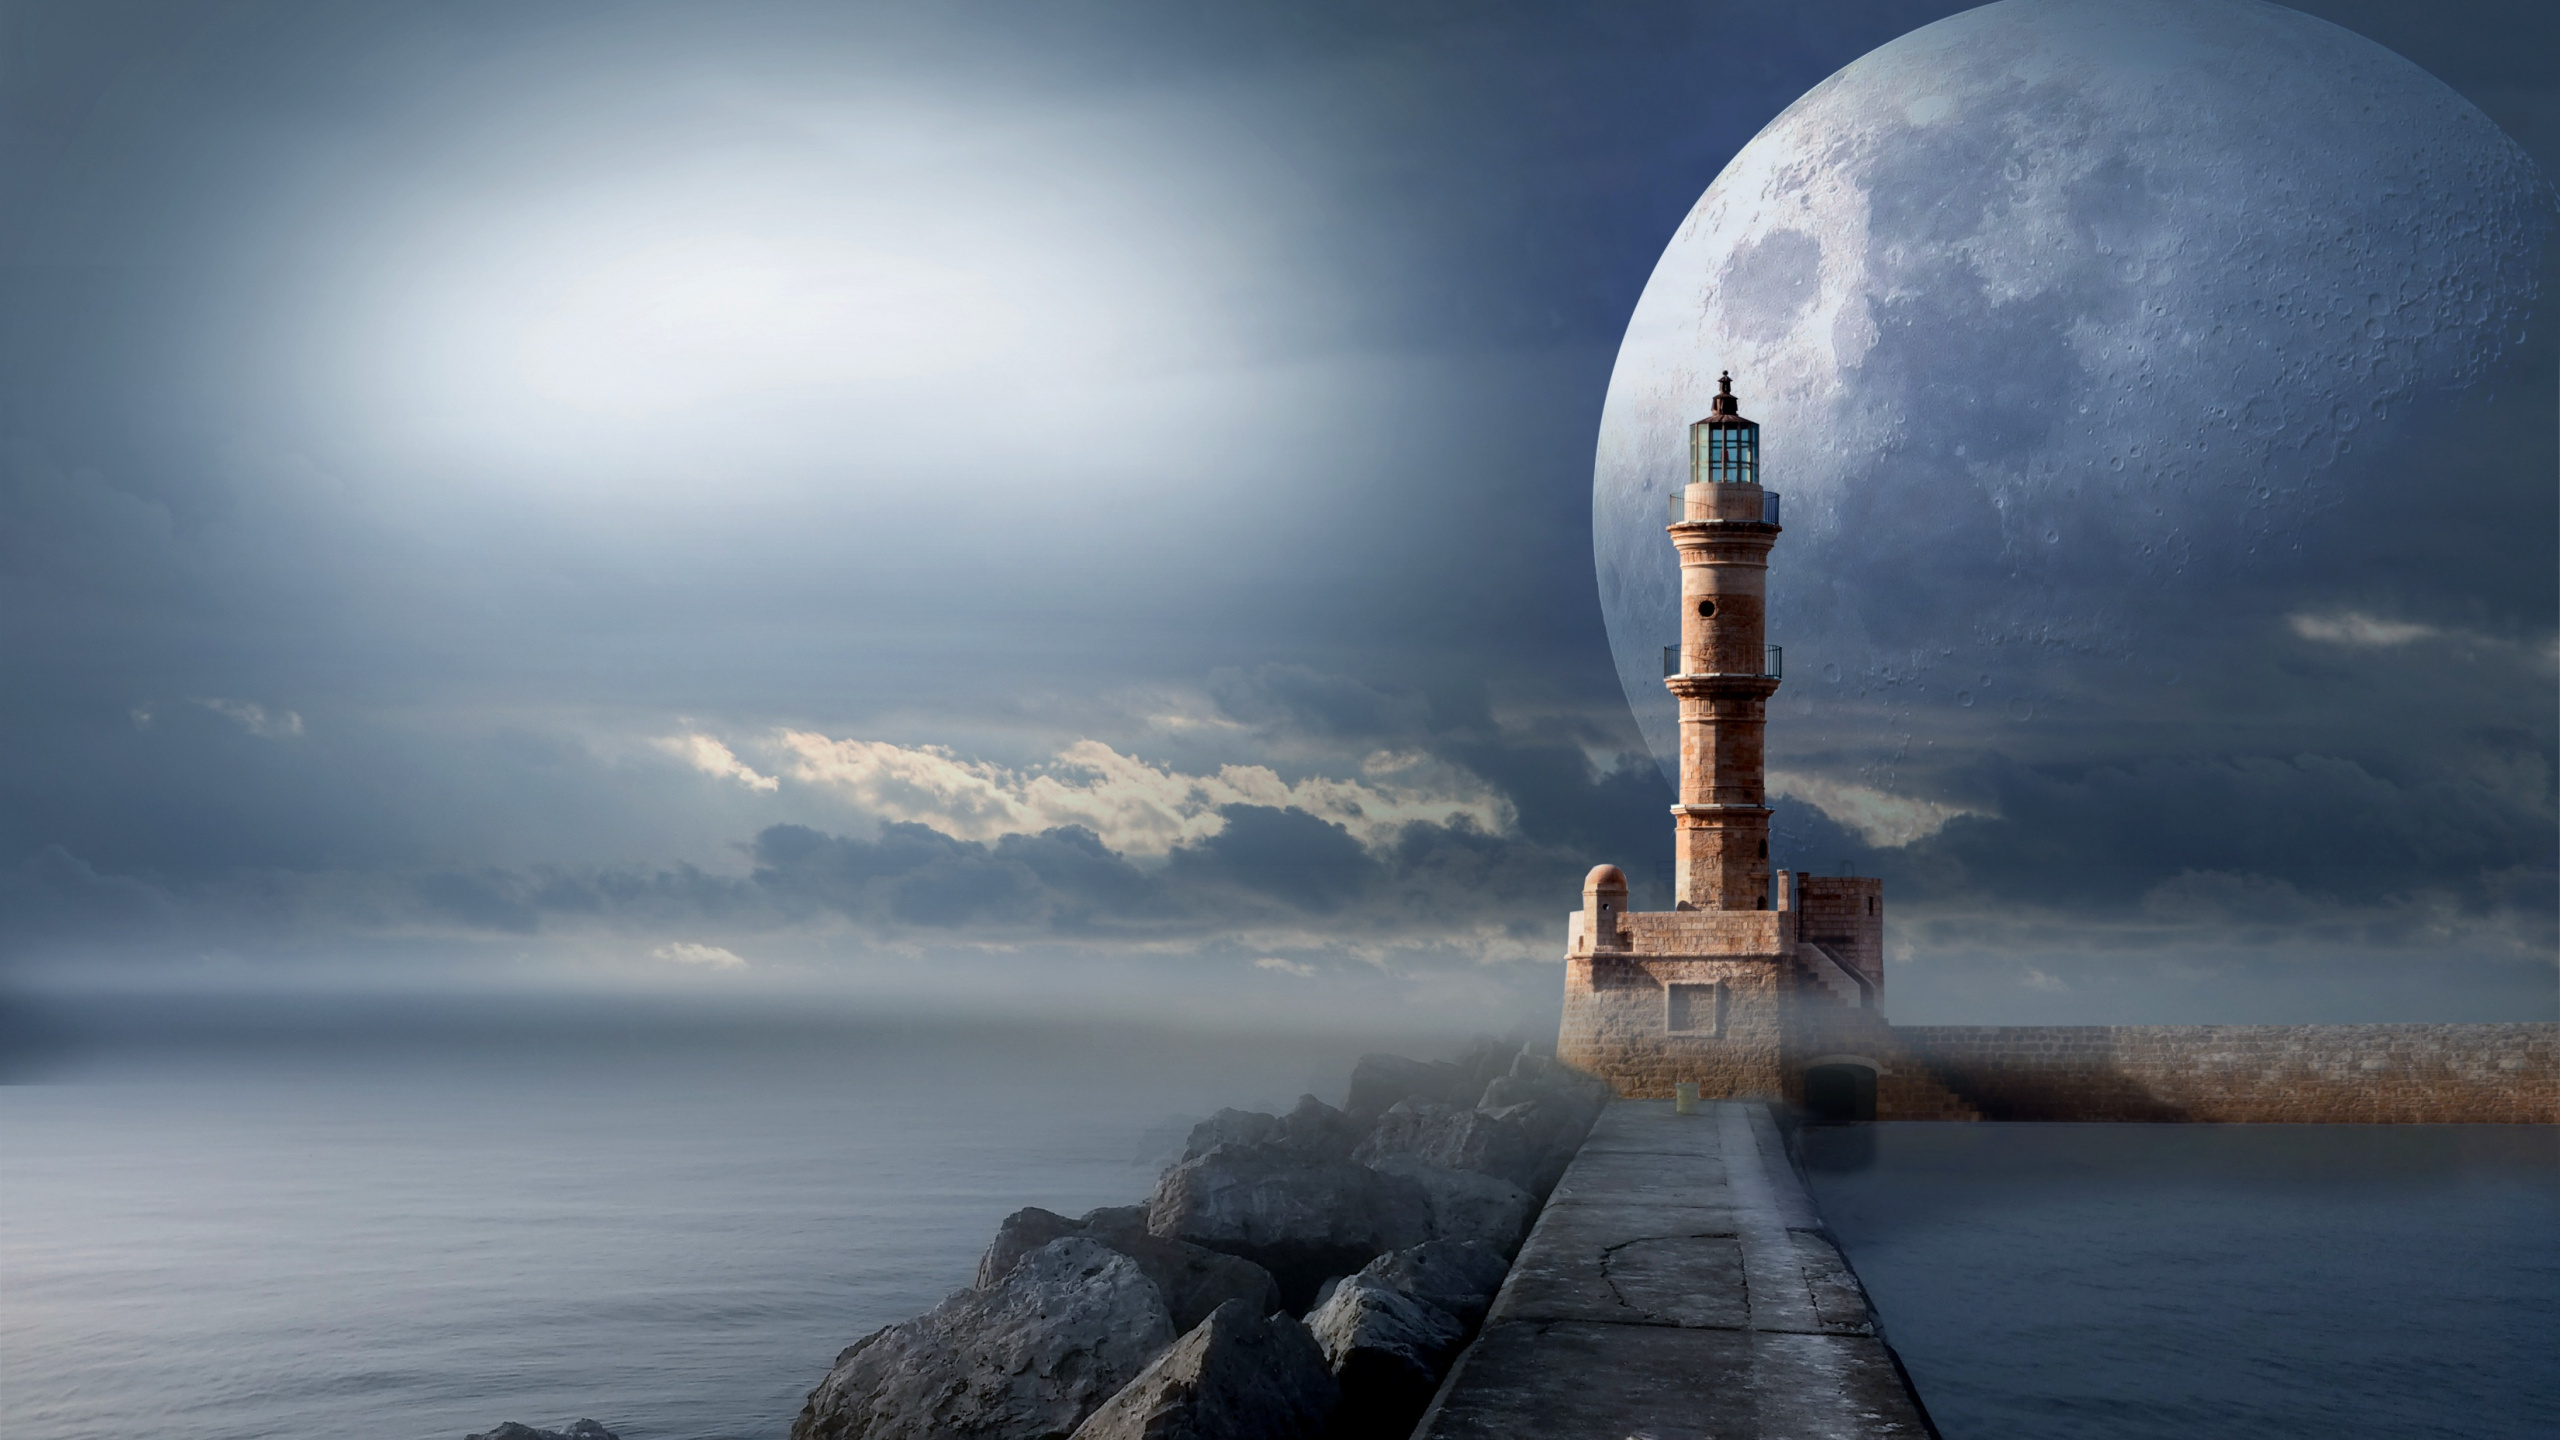 Brown Concrete Lighthouse Near Body of Water During Night Time. Wallpaper in 2560x1440 Resolution